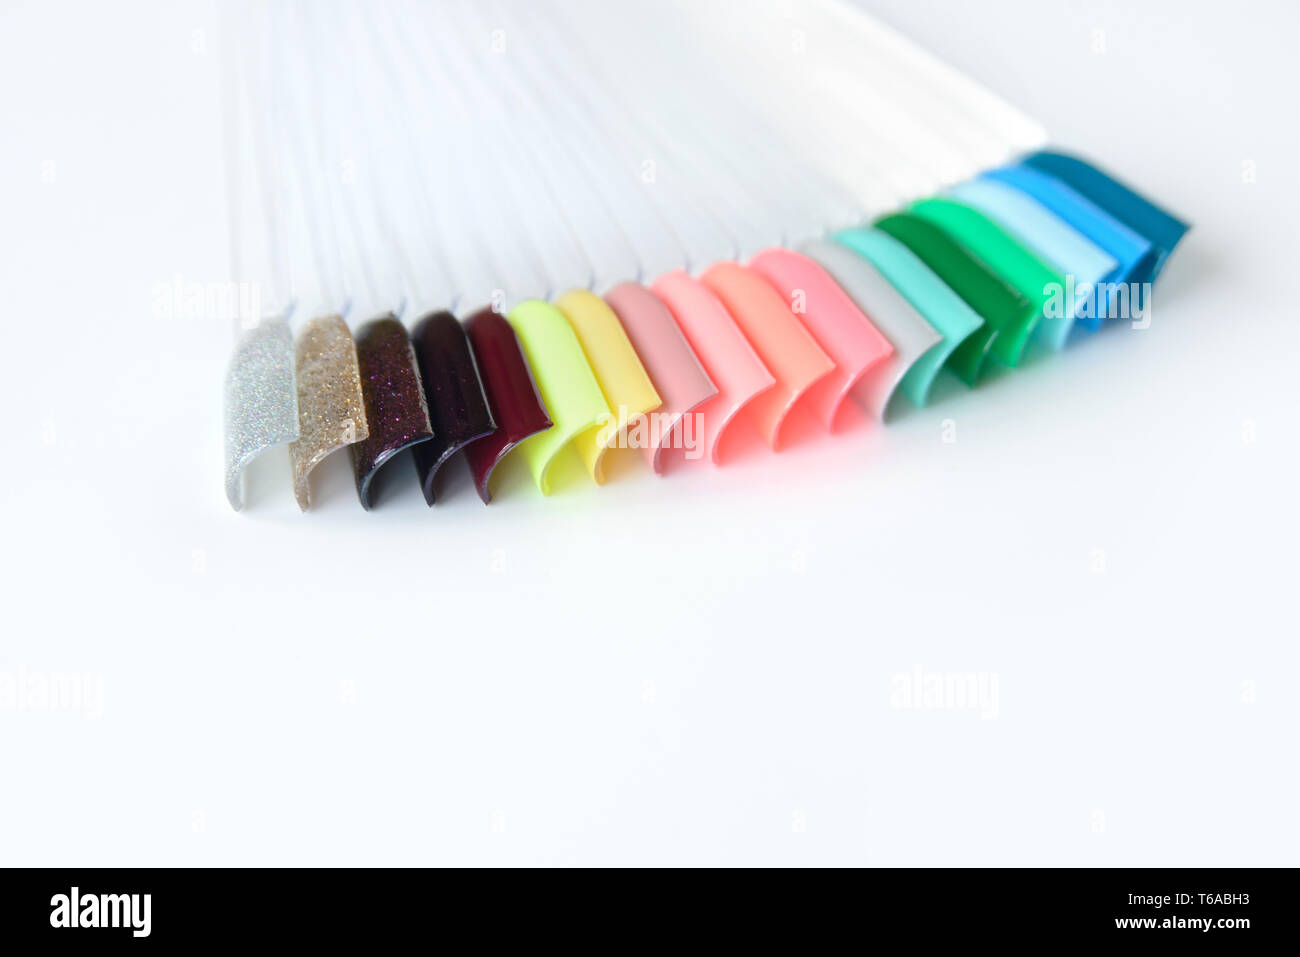 Nail polish samples in different bright colors. Colorful nail lacquer manicure swatches. Top view of nail art samples palette. Free copy space. Stock Photo